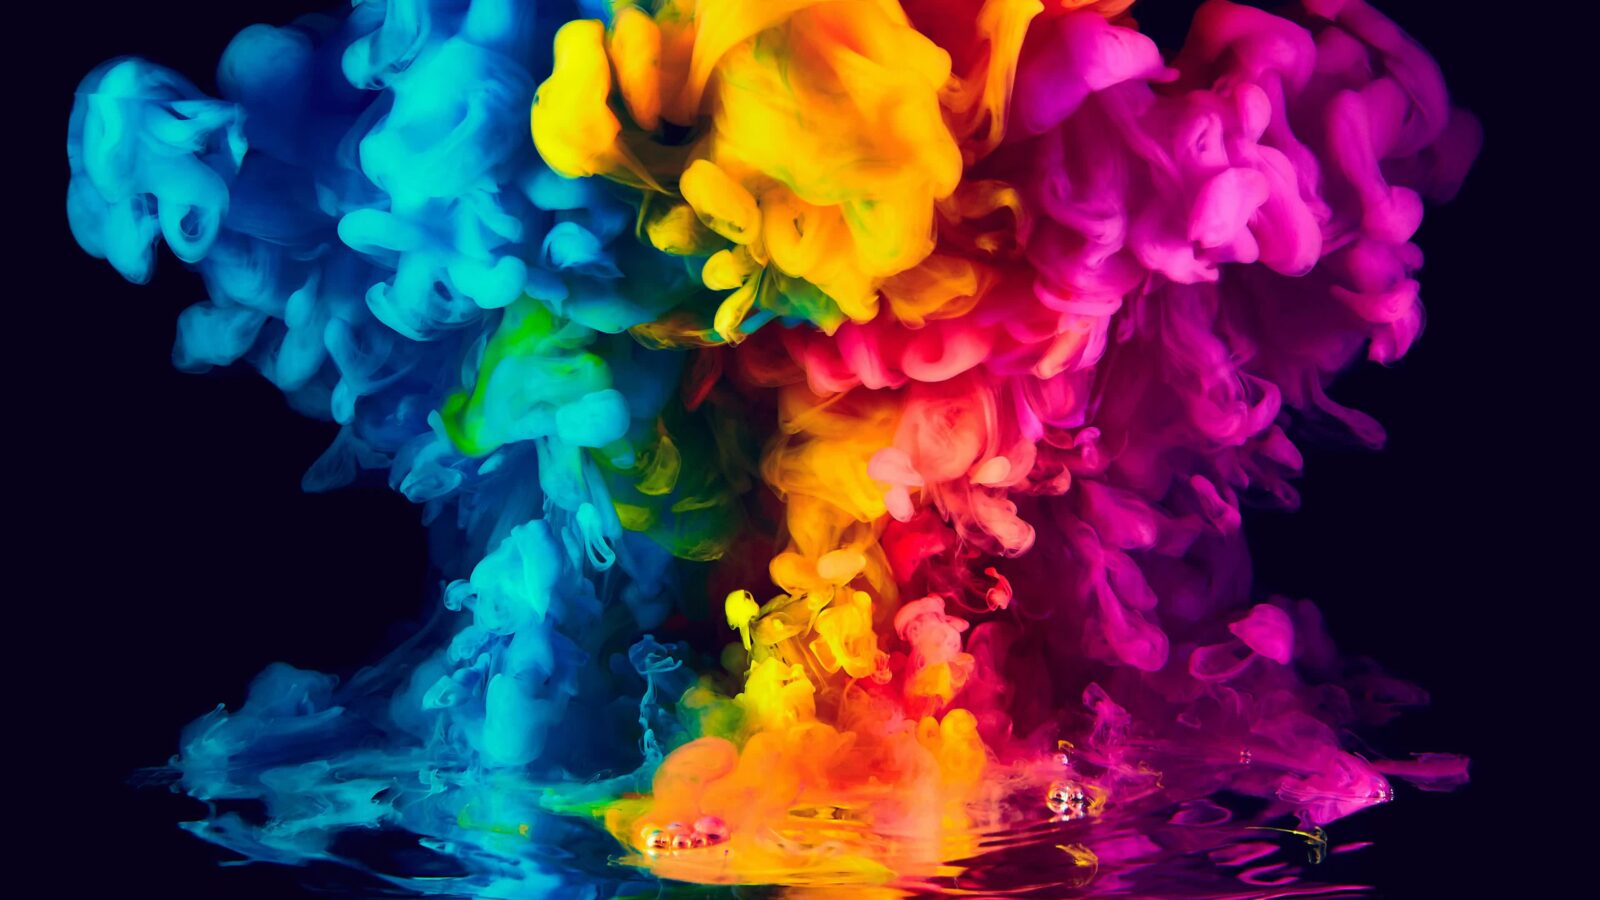 LiveWallpapers4Free.com | Cool Colorful Abstract Smoke 4K - Free Live Wallpaper